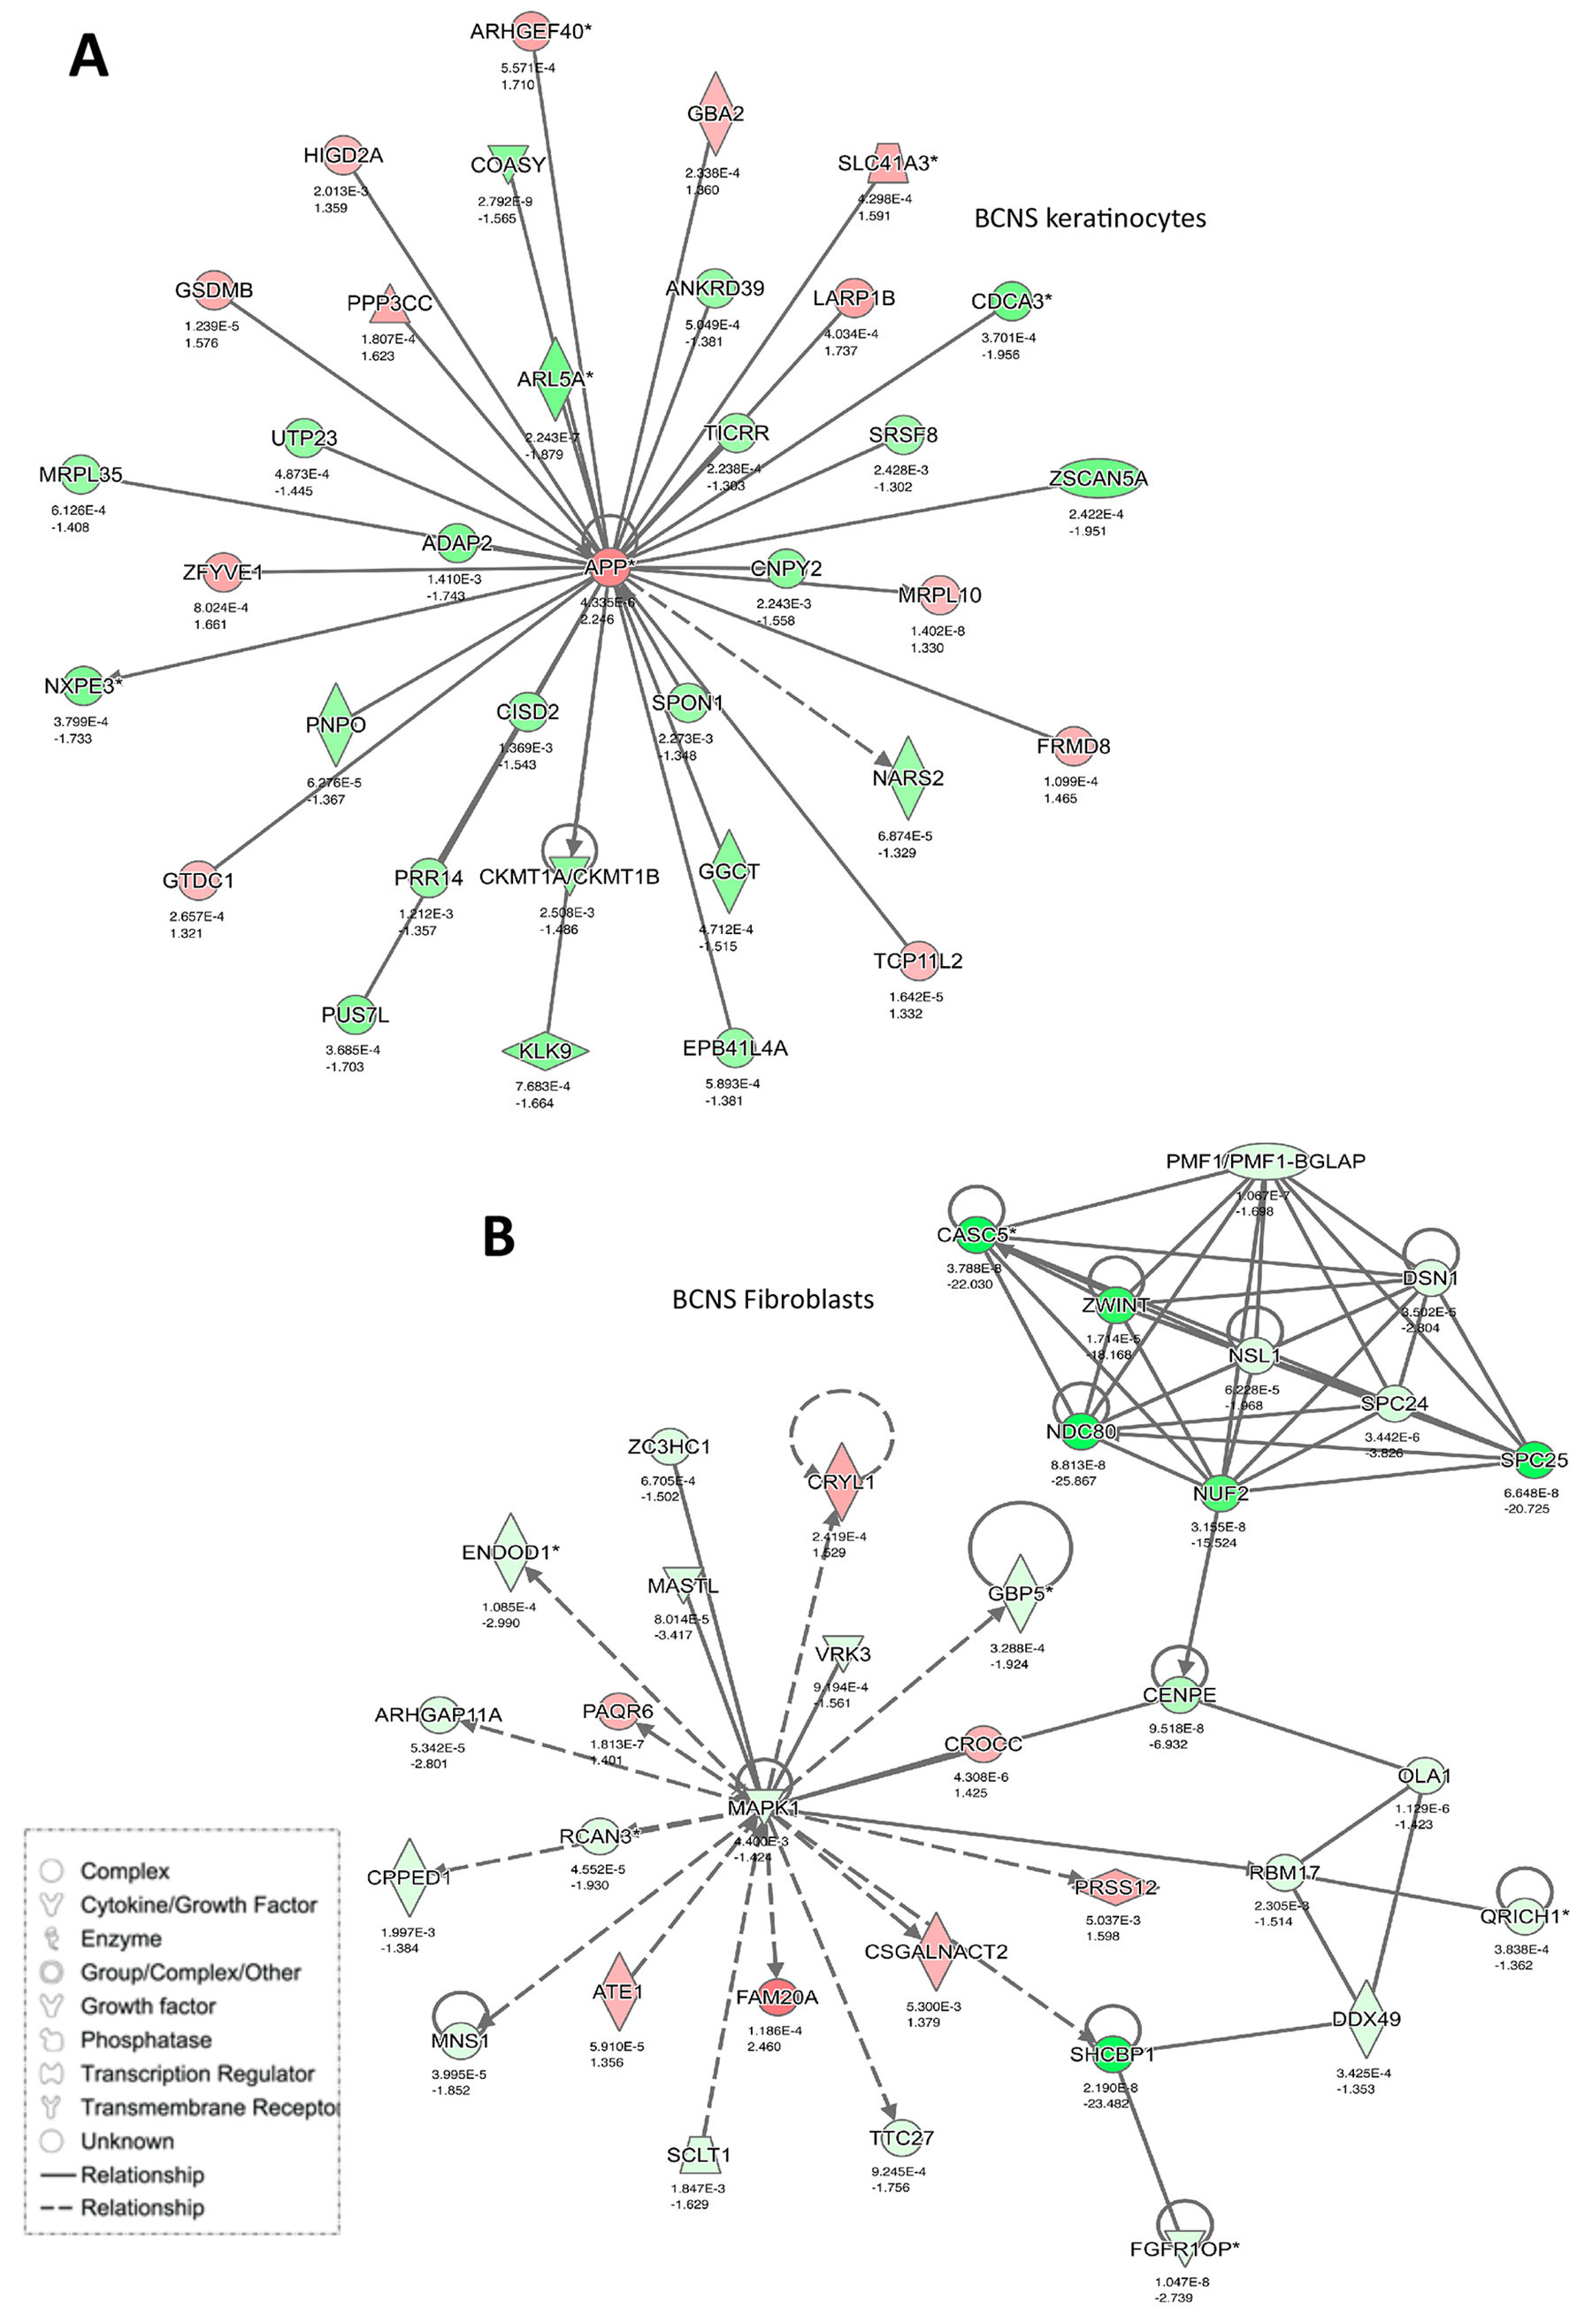 Networks enriched in BCNS cells after rapamycin treatment.